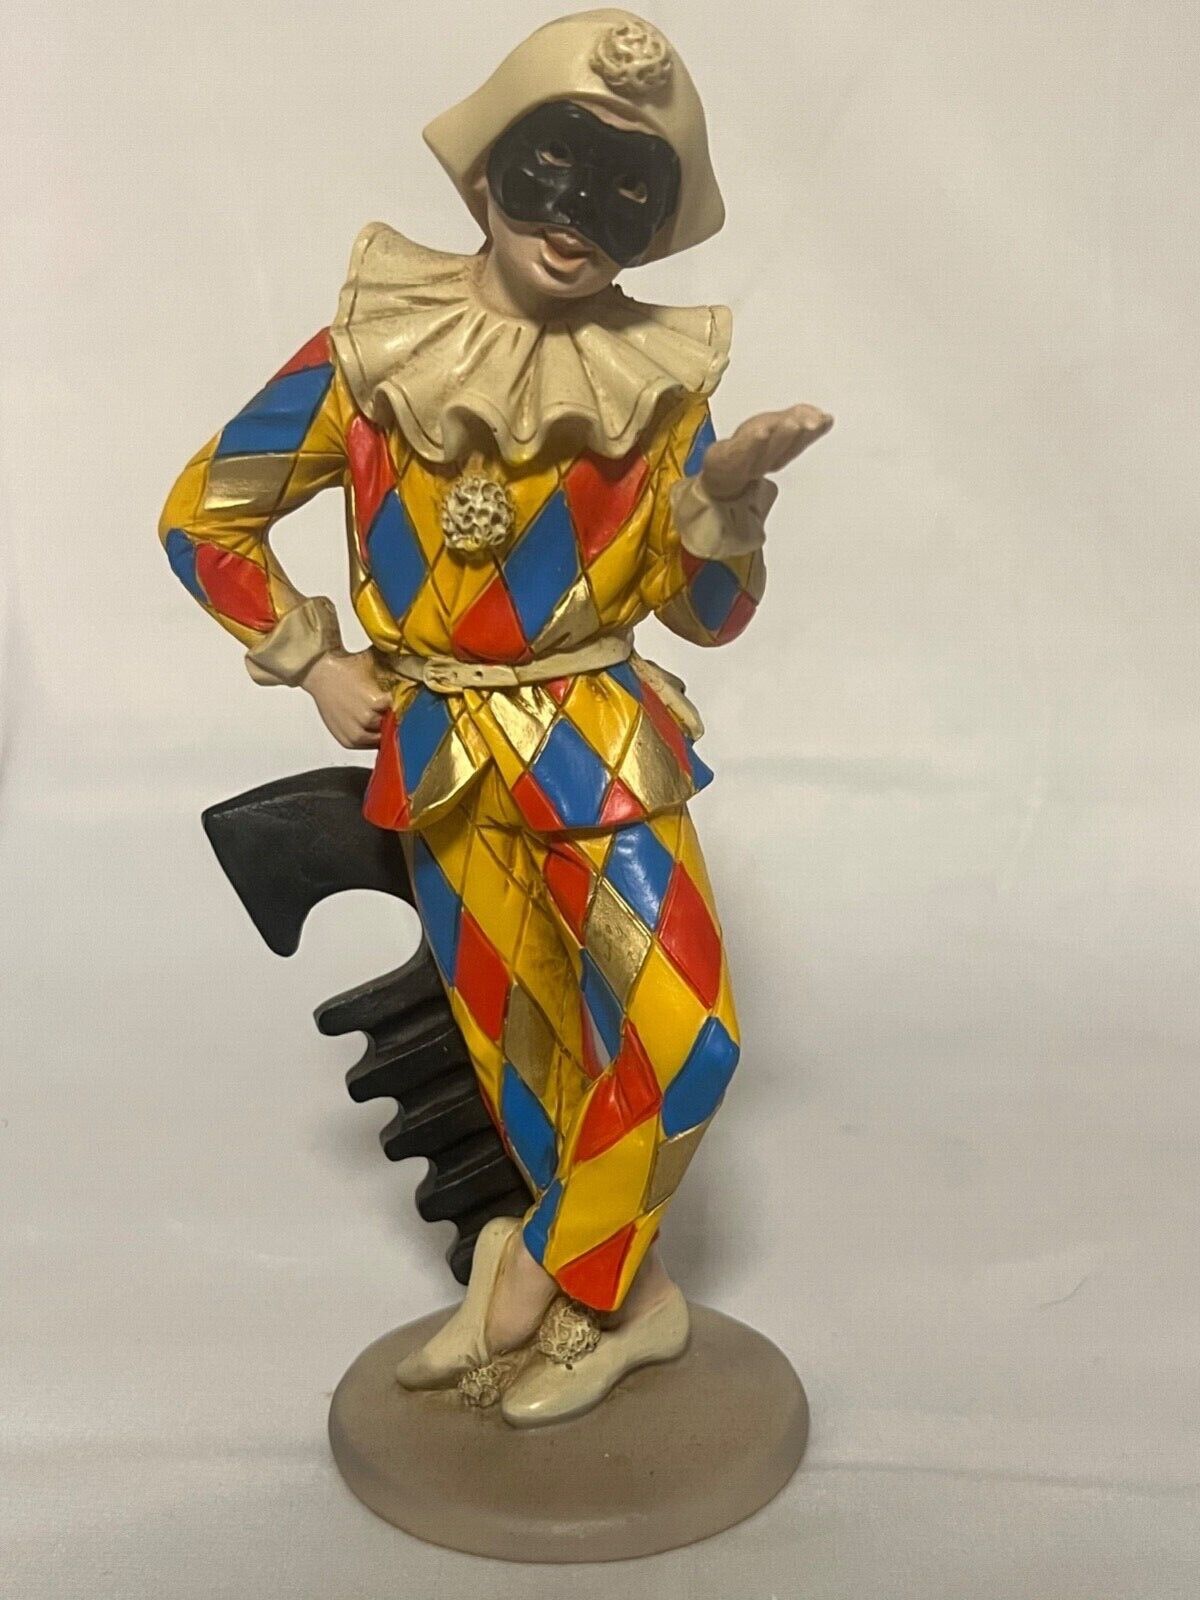 Vintage Made in Italy Harlequin Figurine 